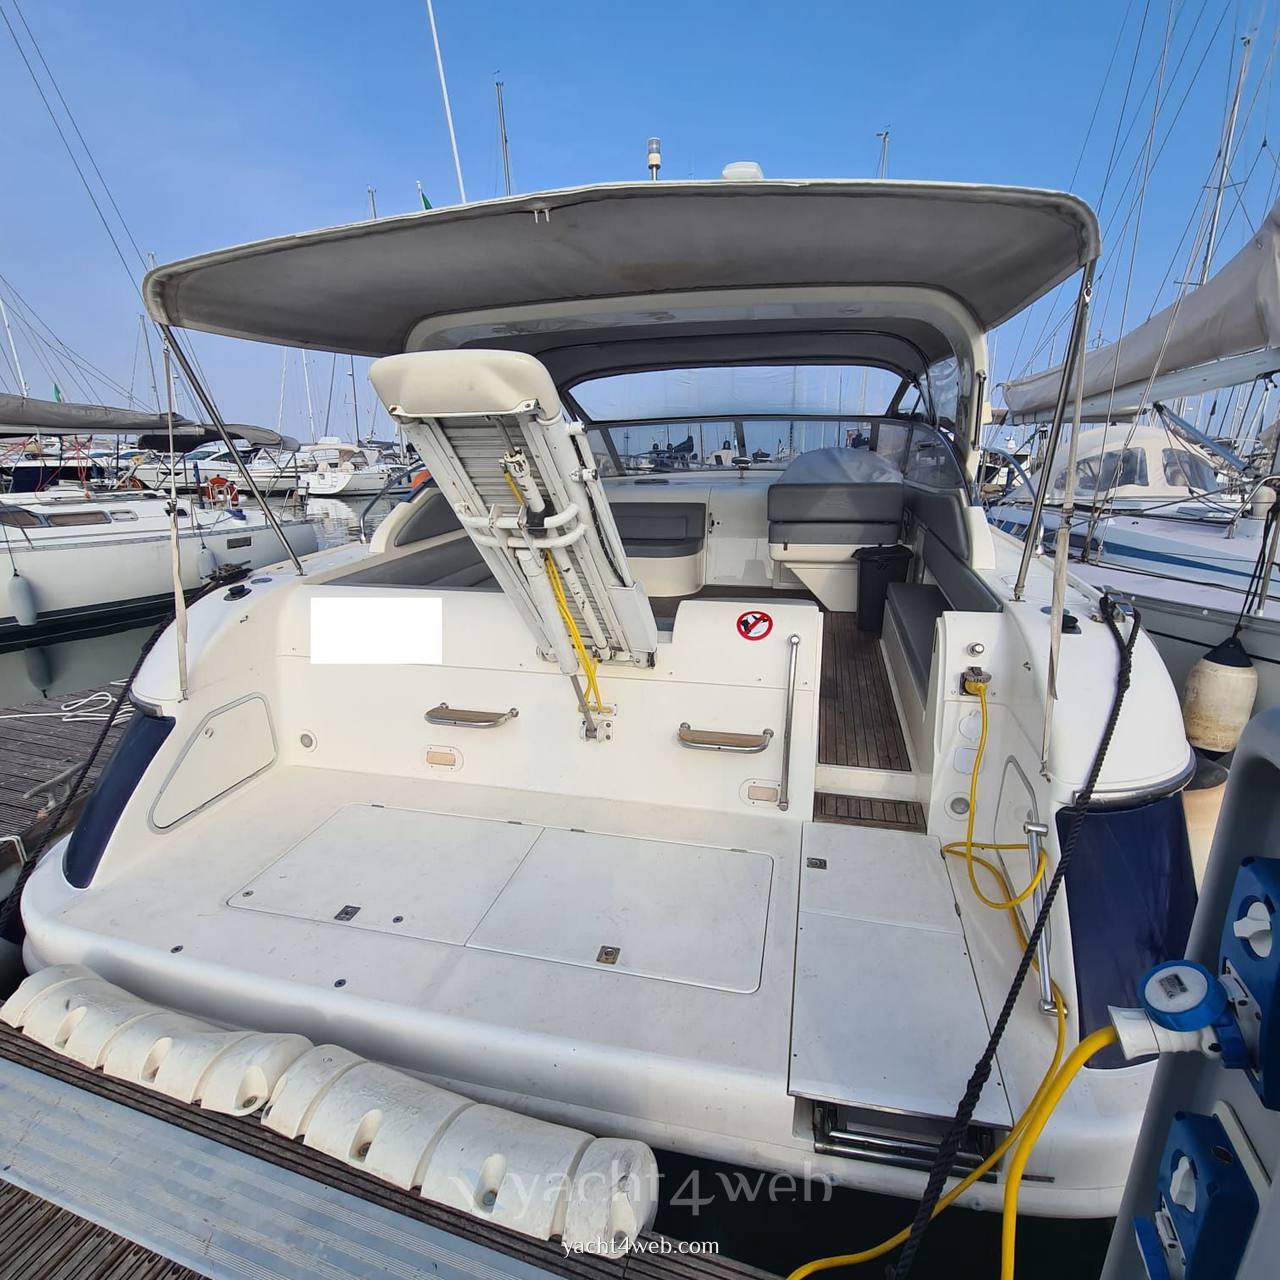 Fiart mare Fiart 40 genius Motor boat used for sale